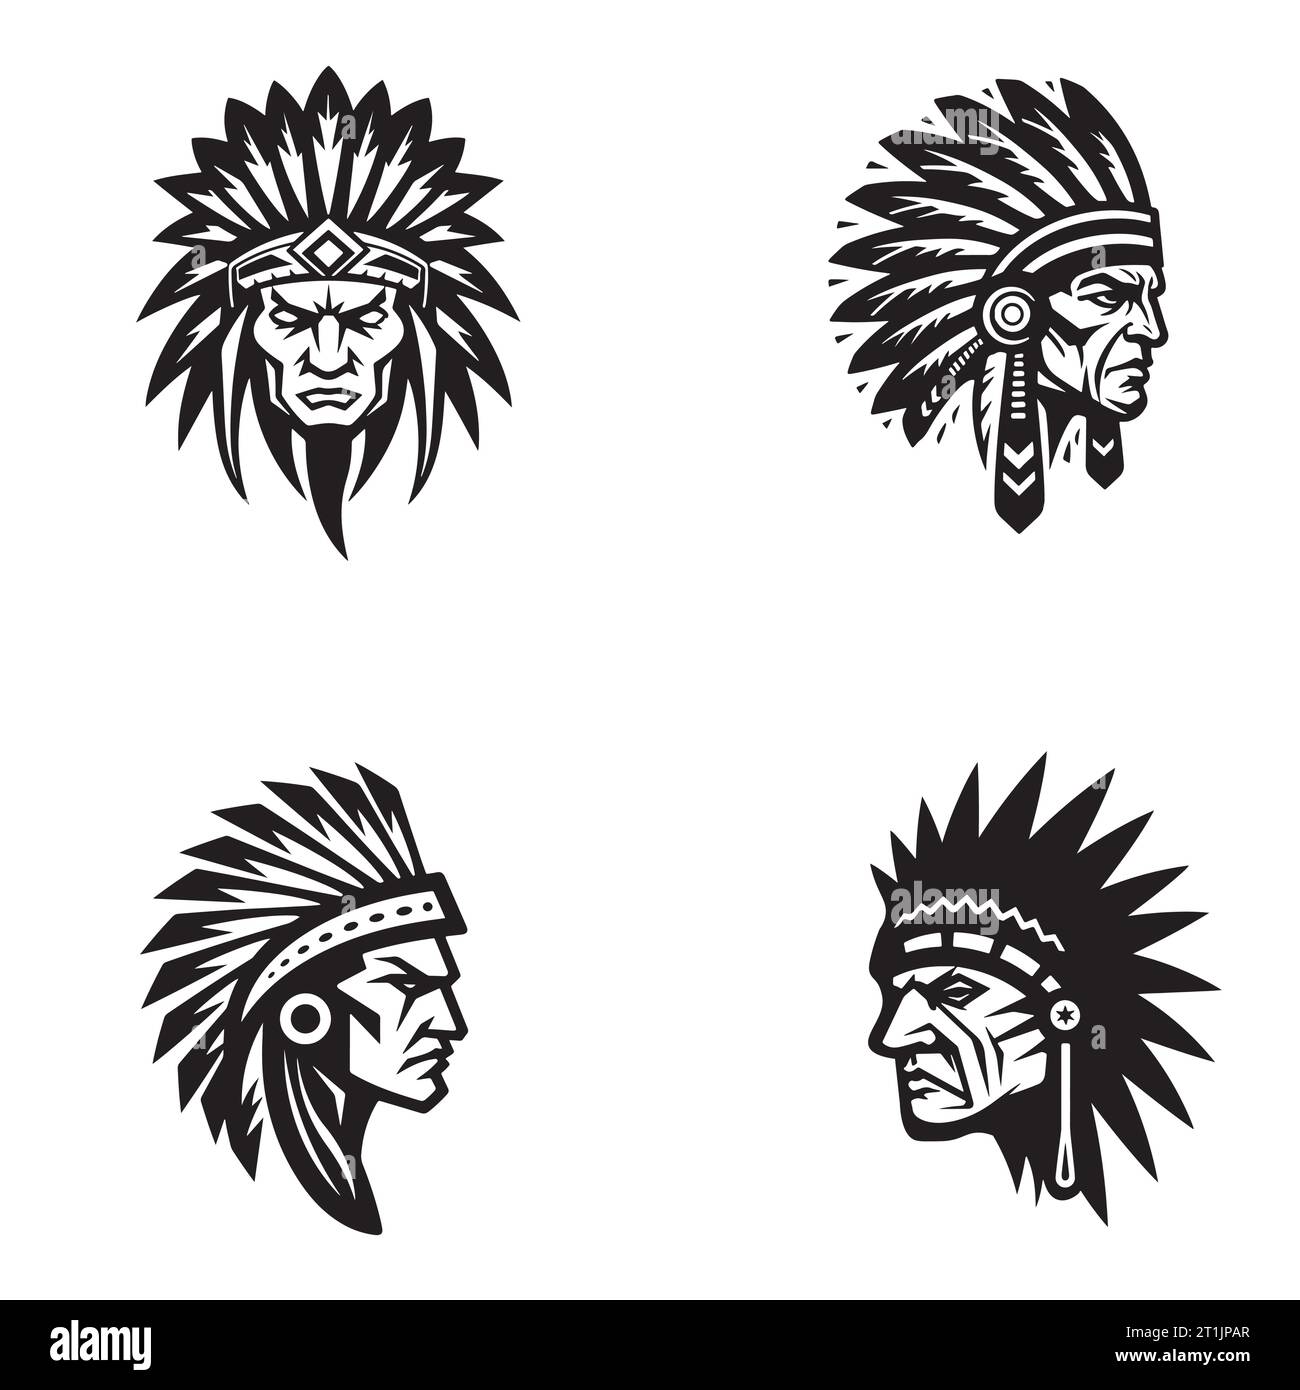 Indian Chief Head Graphic icons set Vector illustration Stock Vector